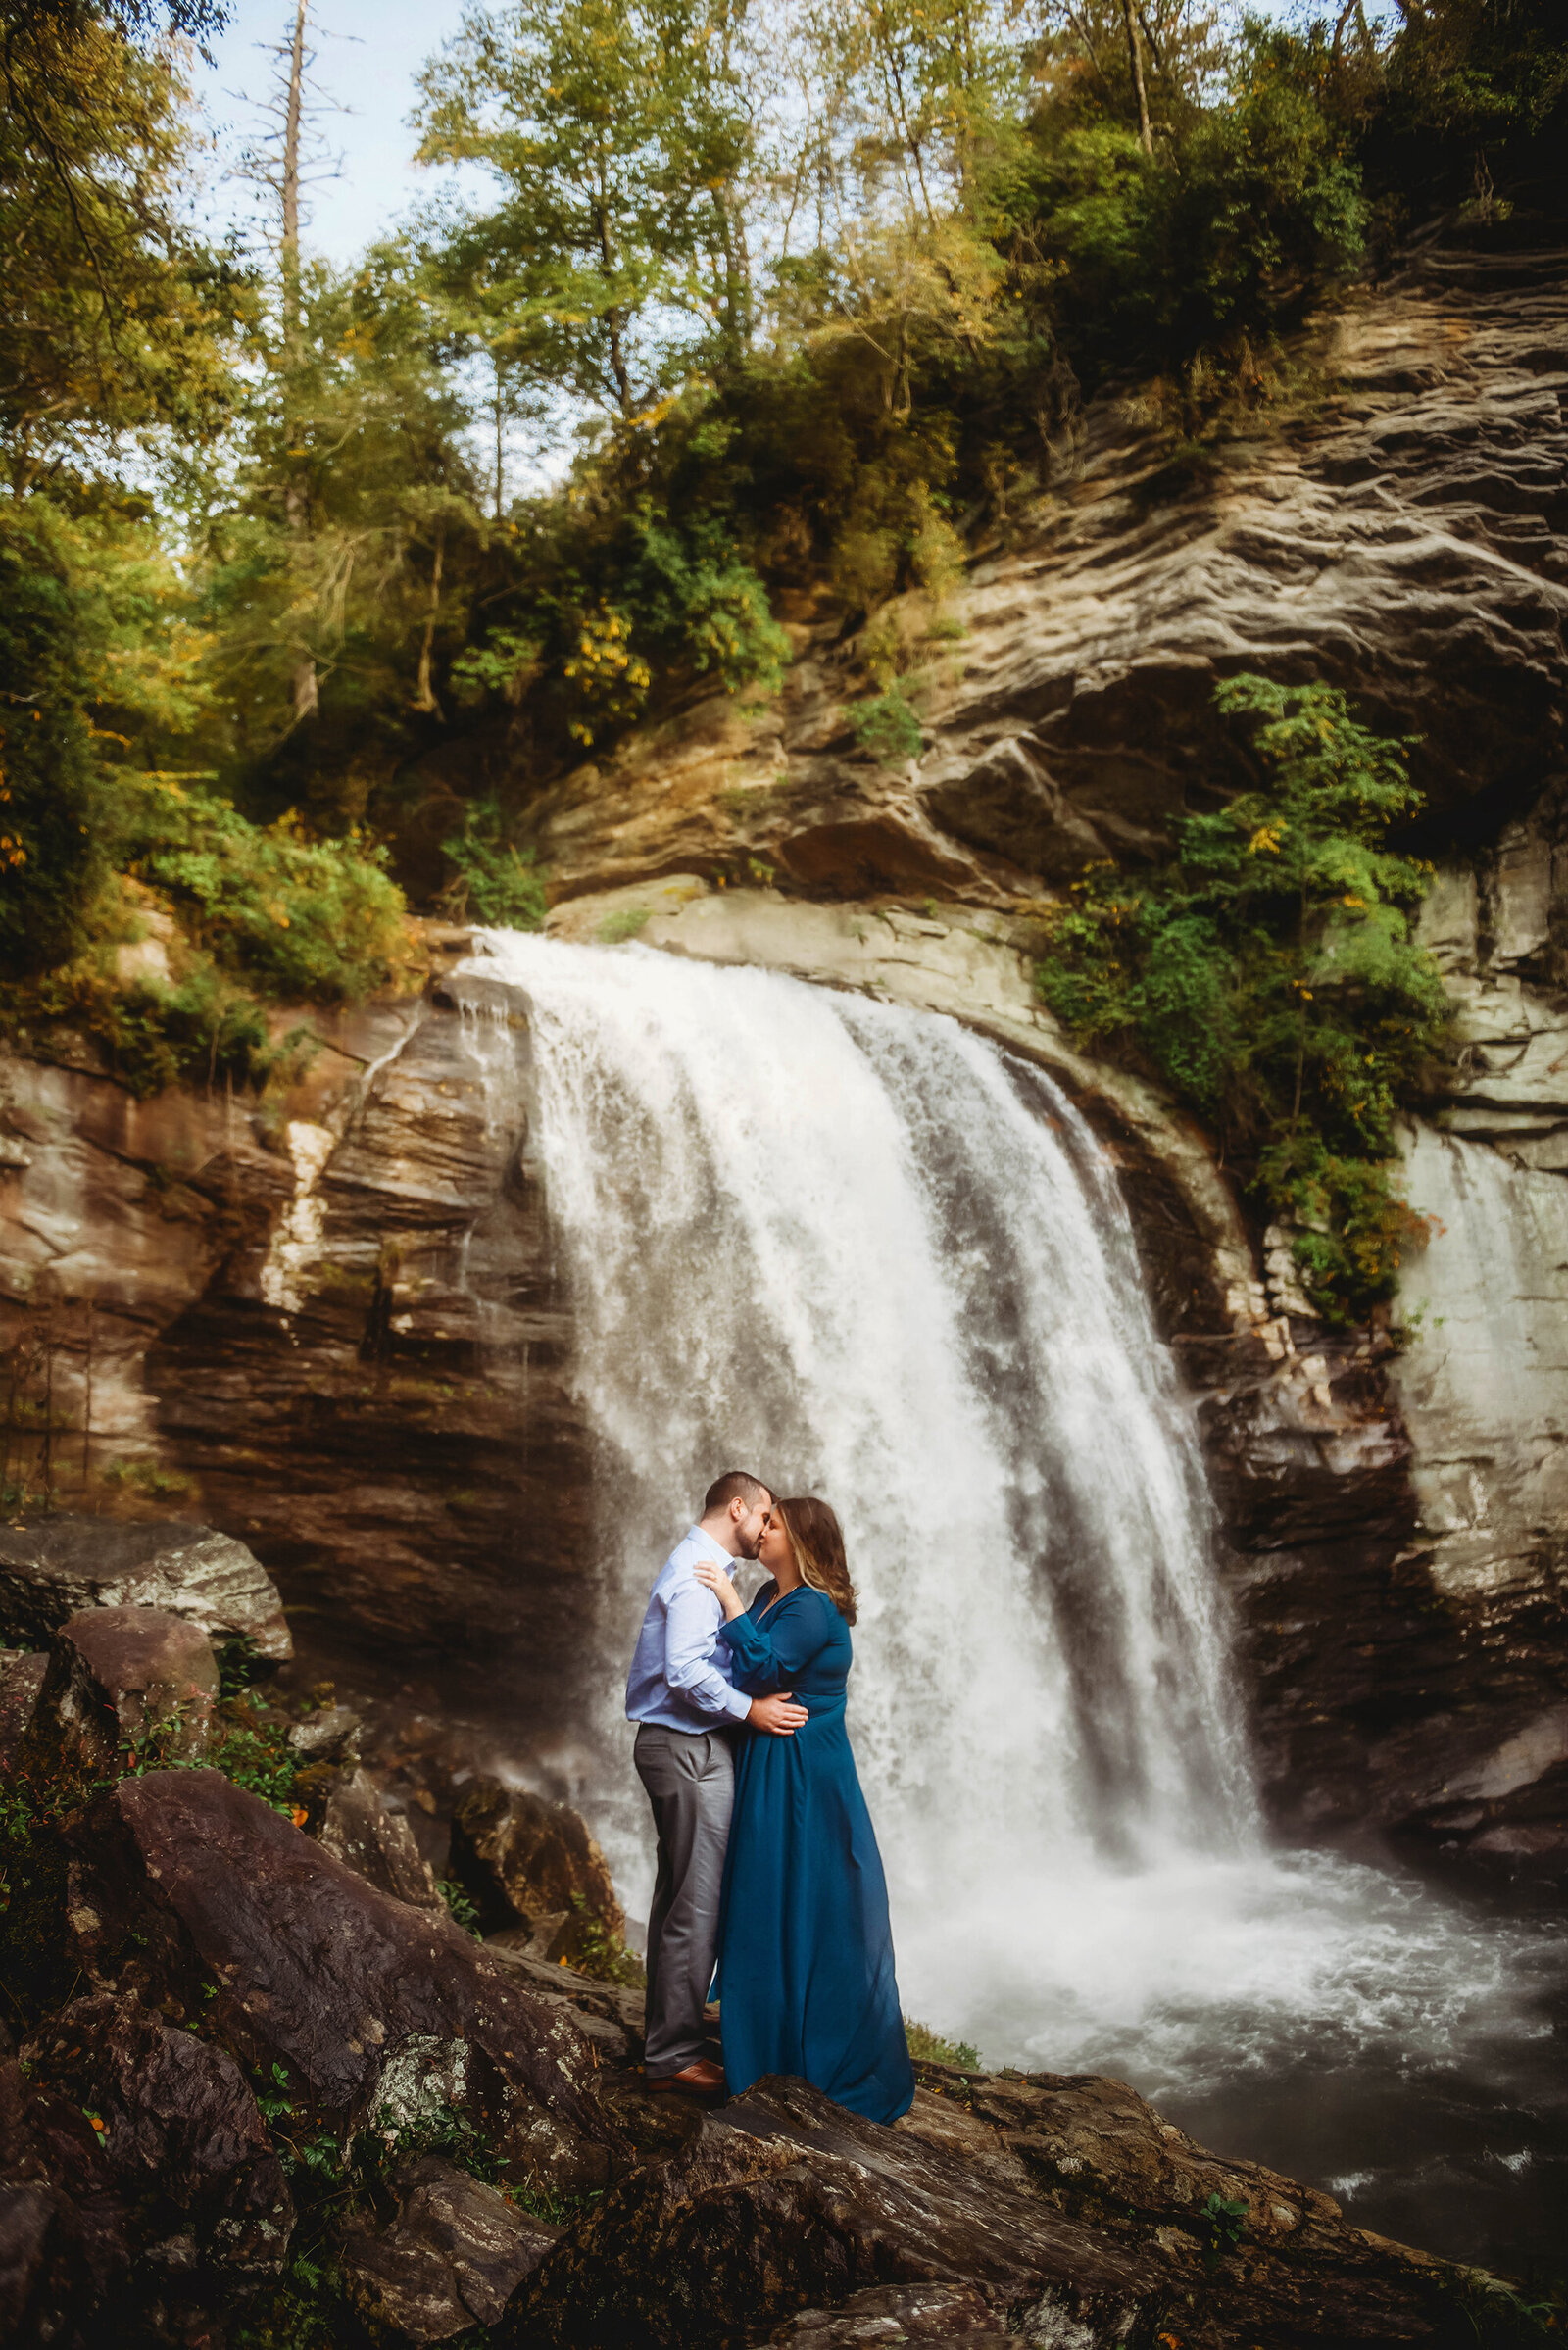 Couple kisses in front of Looking Glass Falls while posing for Engagement Photos near Asheville, NC.